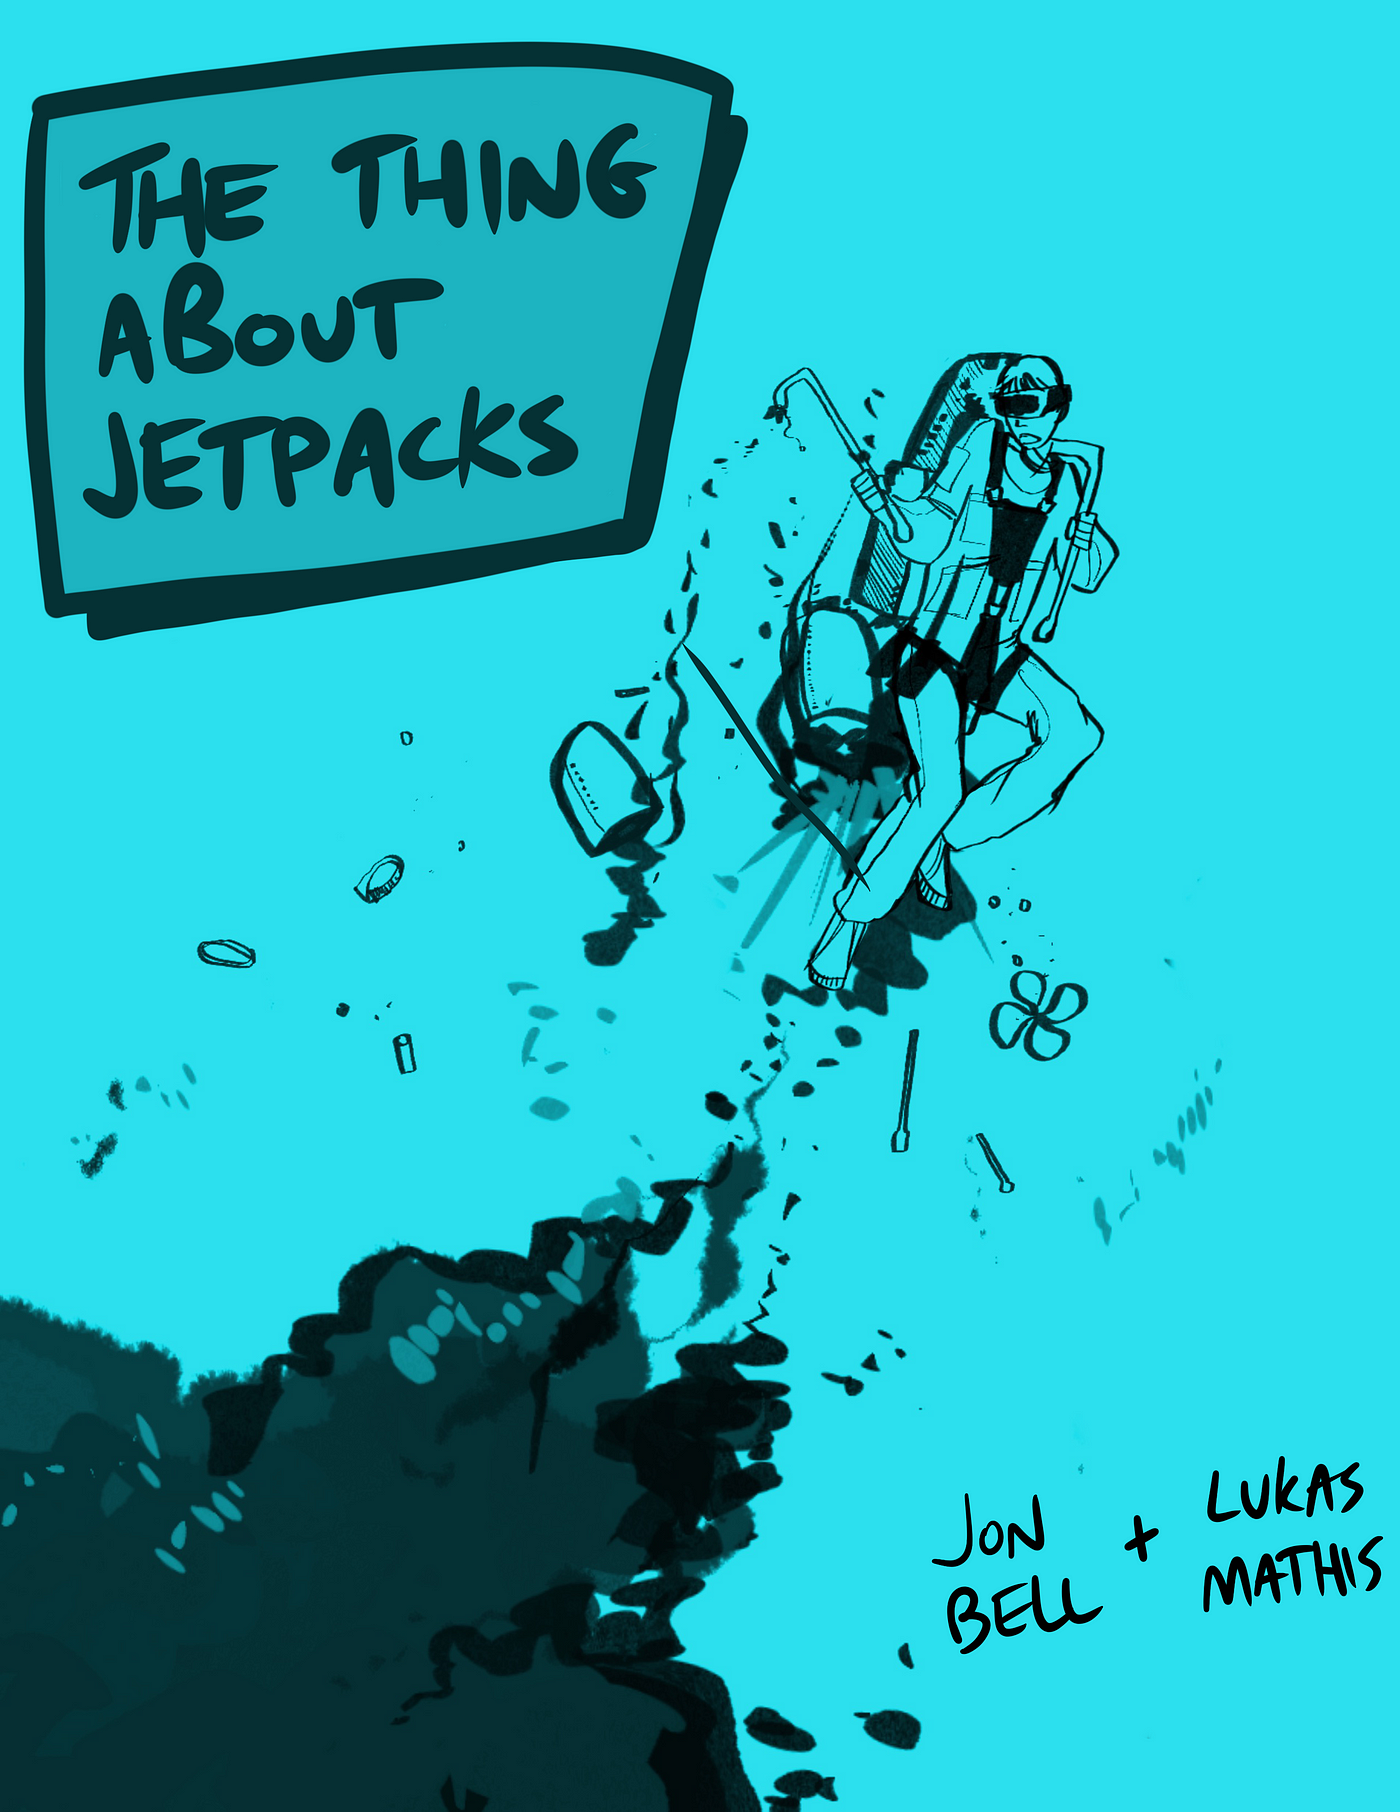 The Thing About Jetpacks. Essays about designing wonderful things